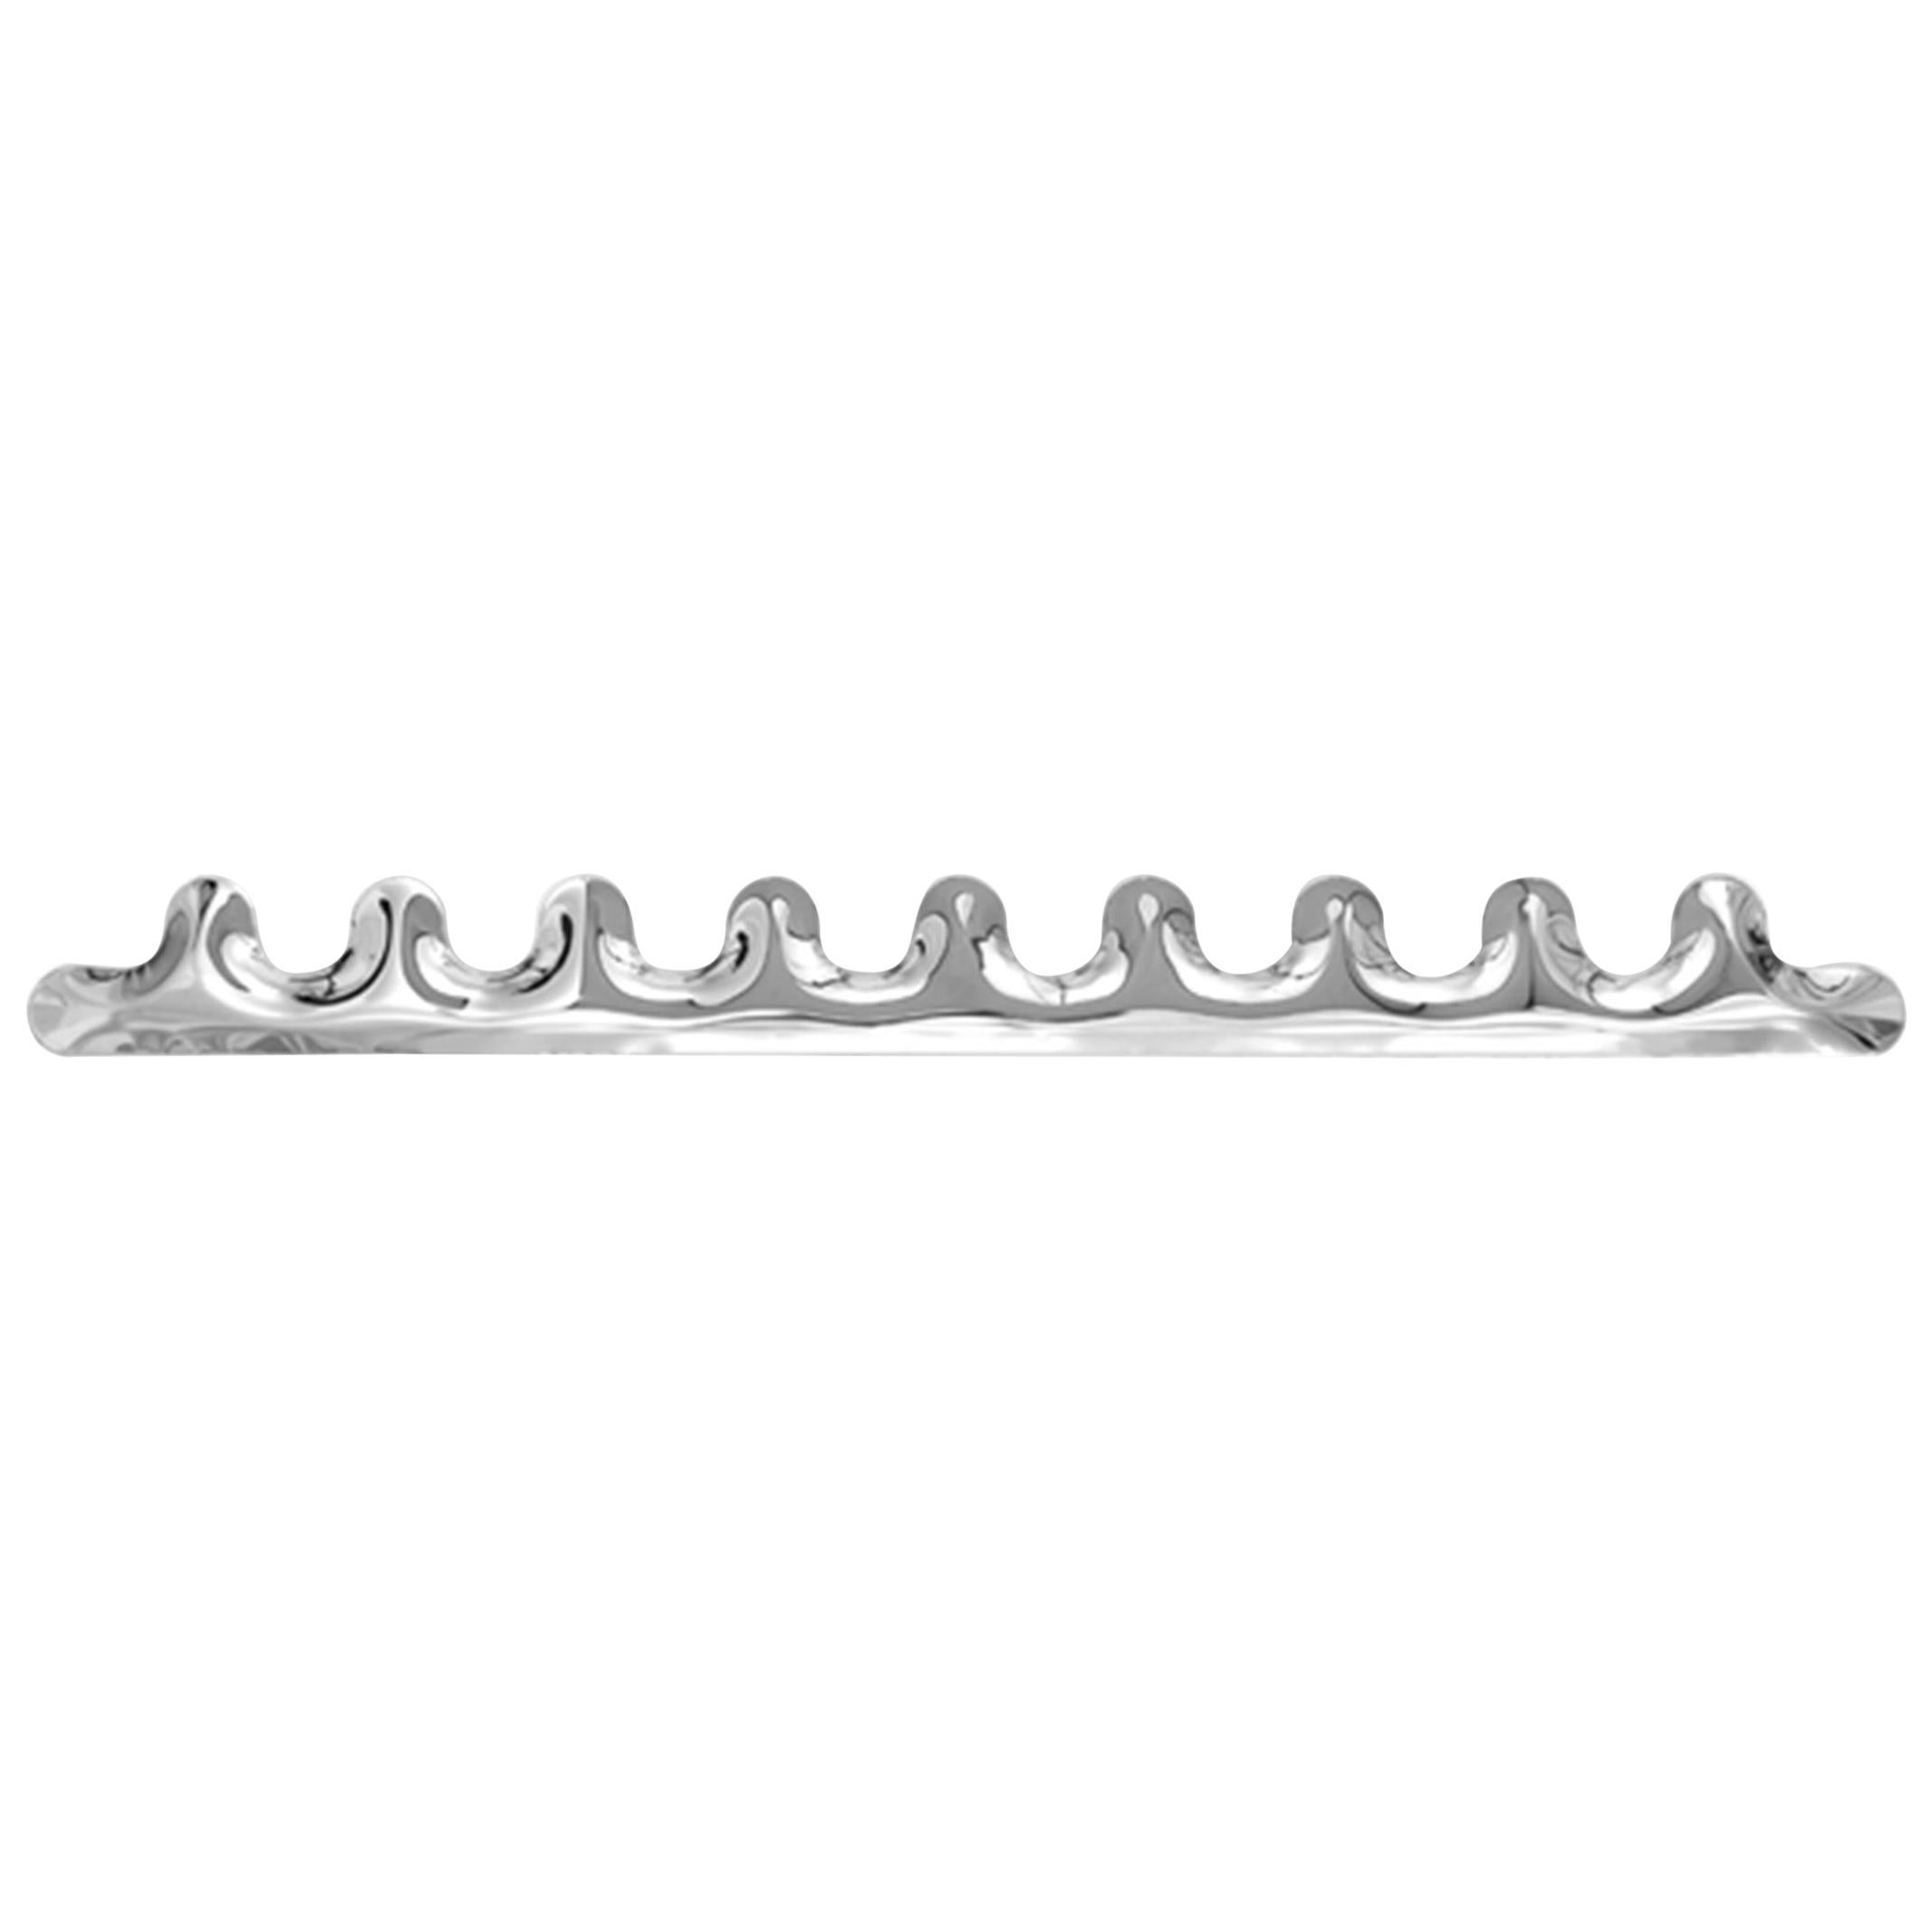 Kamm 9 Hanger Polished Stainless Steel Hanger by Zieta For Sale